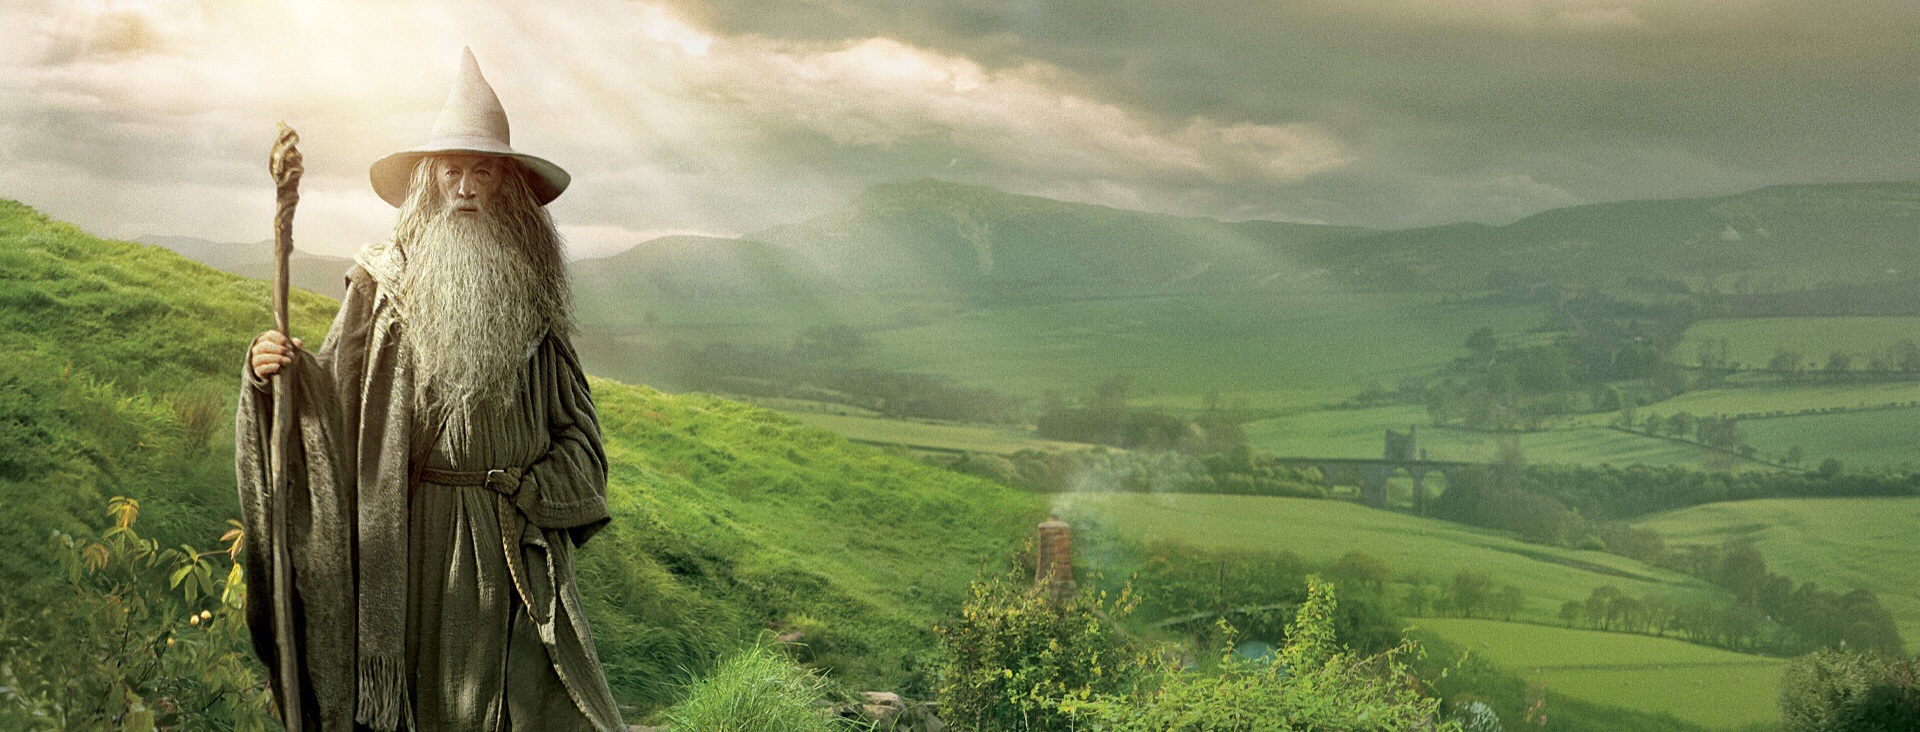 The Hobbit: An unexpected journey Blu-ray Steelbook to return to UK with an Extended Edition